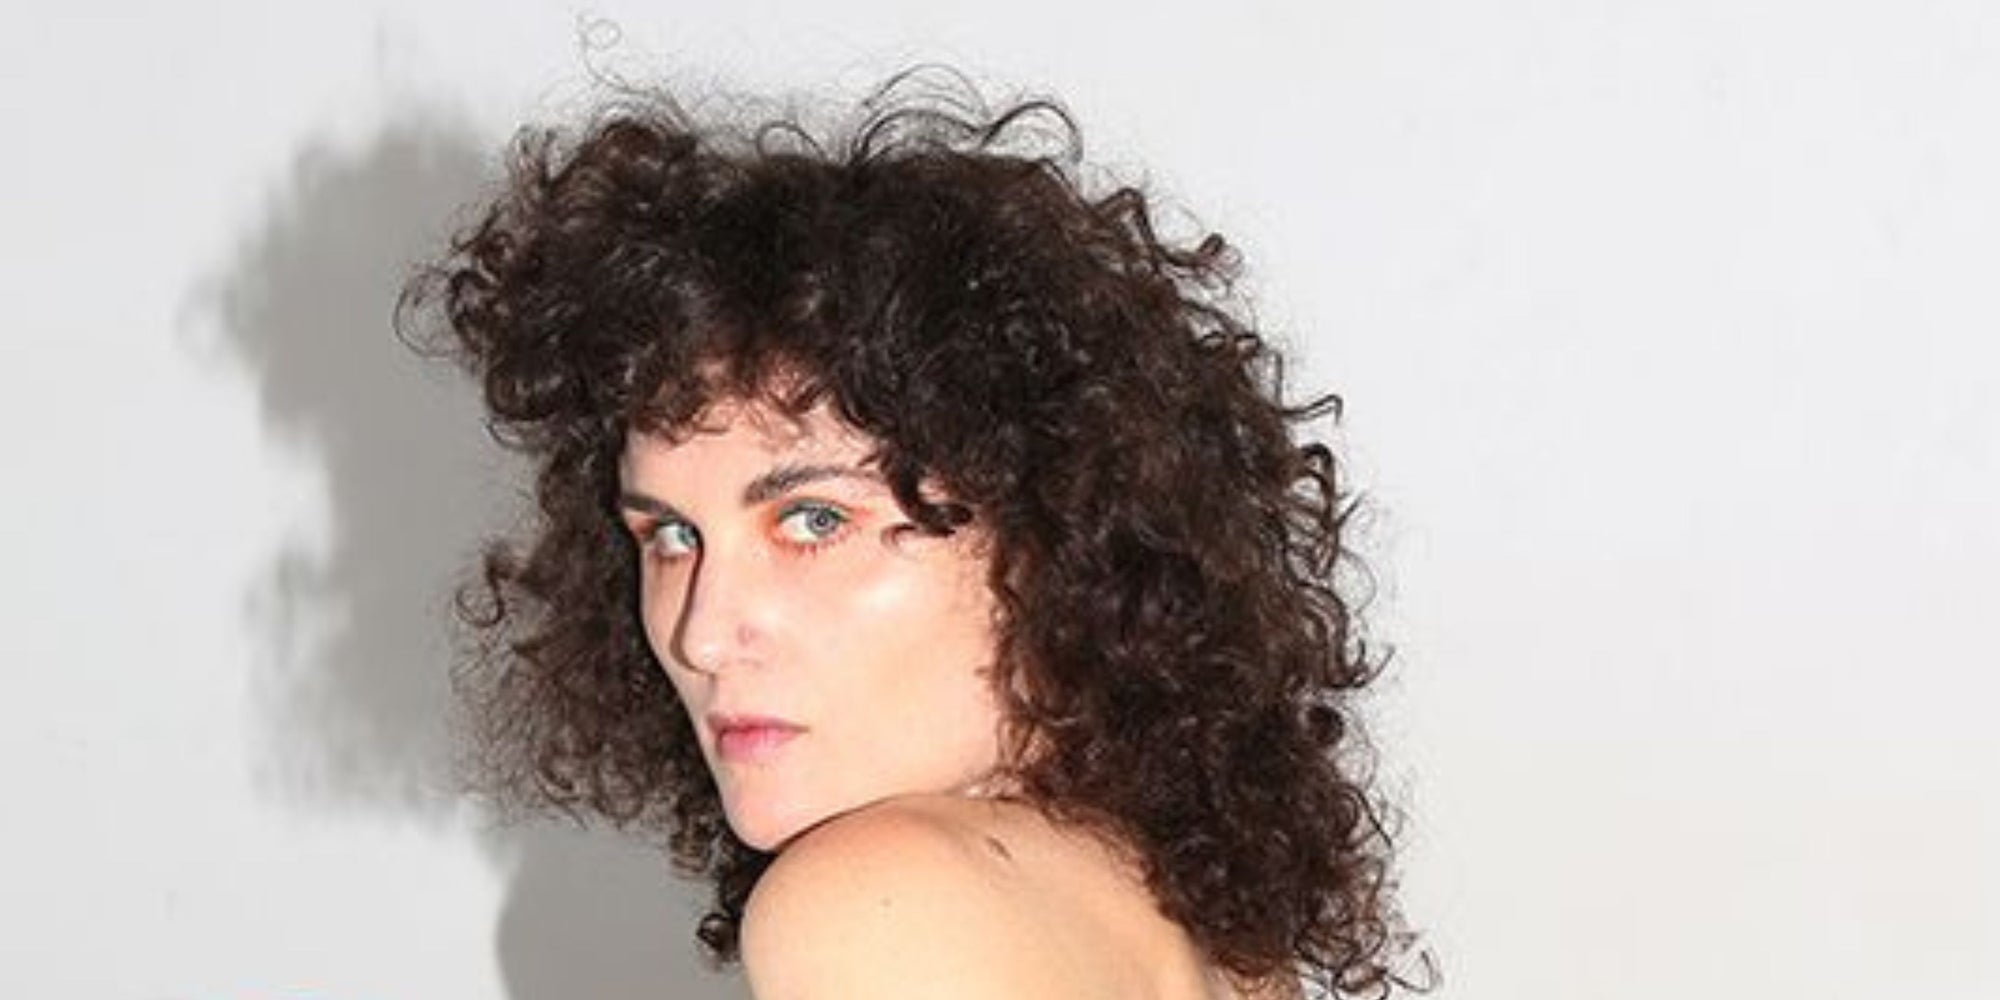 Why You Should Avoid Thinning Shears On Curly Hair